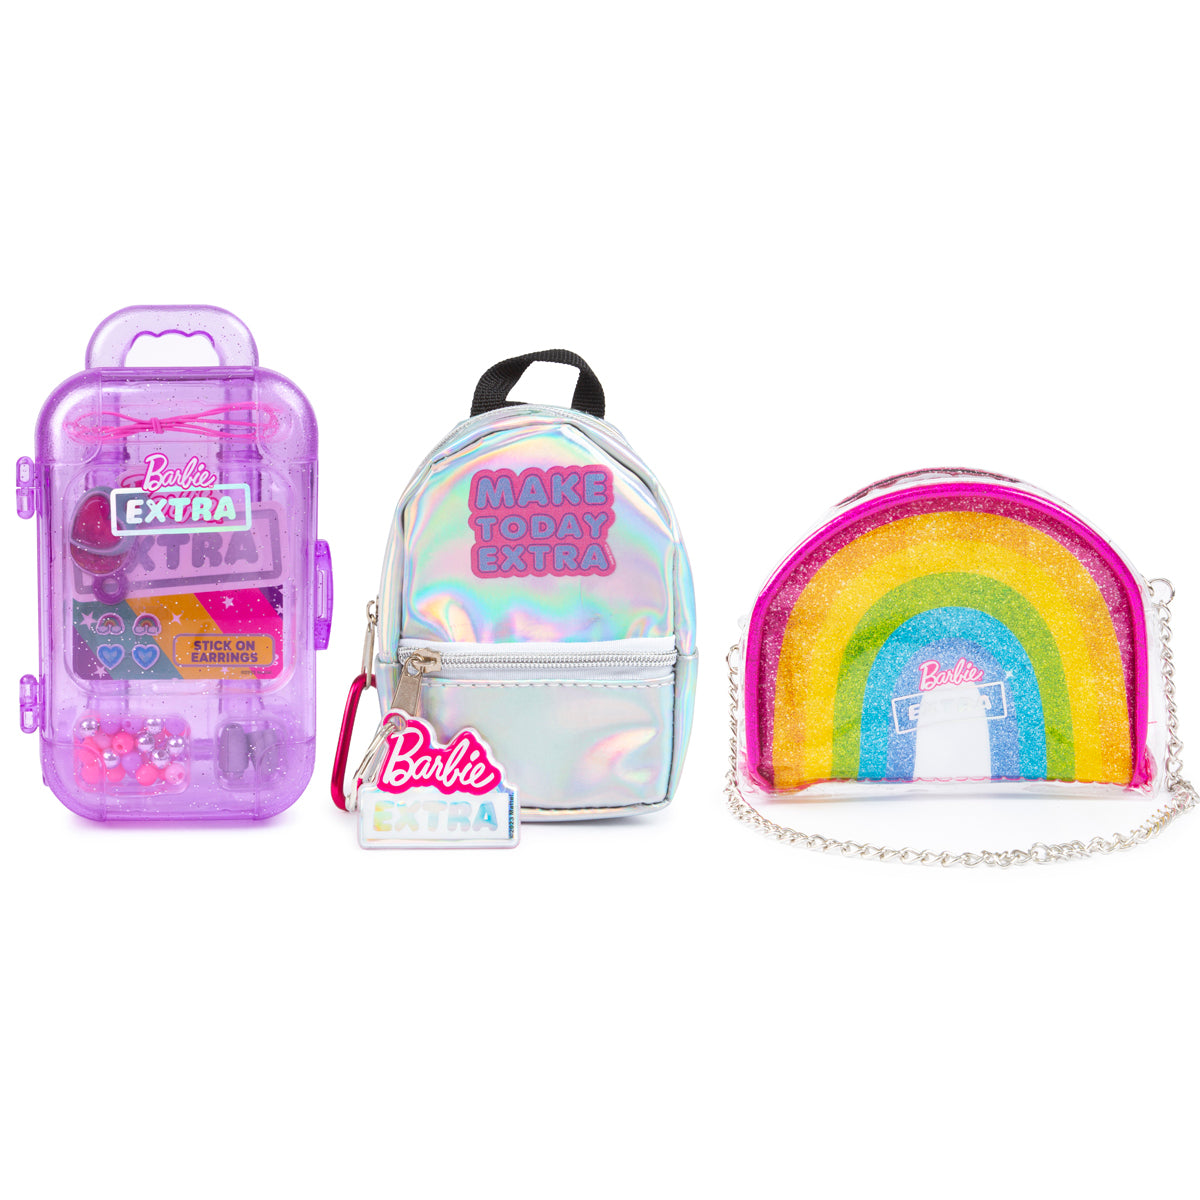 Barbie Extra Miniature Bag Collection 3 Pack – The Entertainer Pakistan